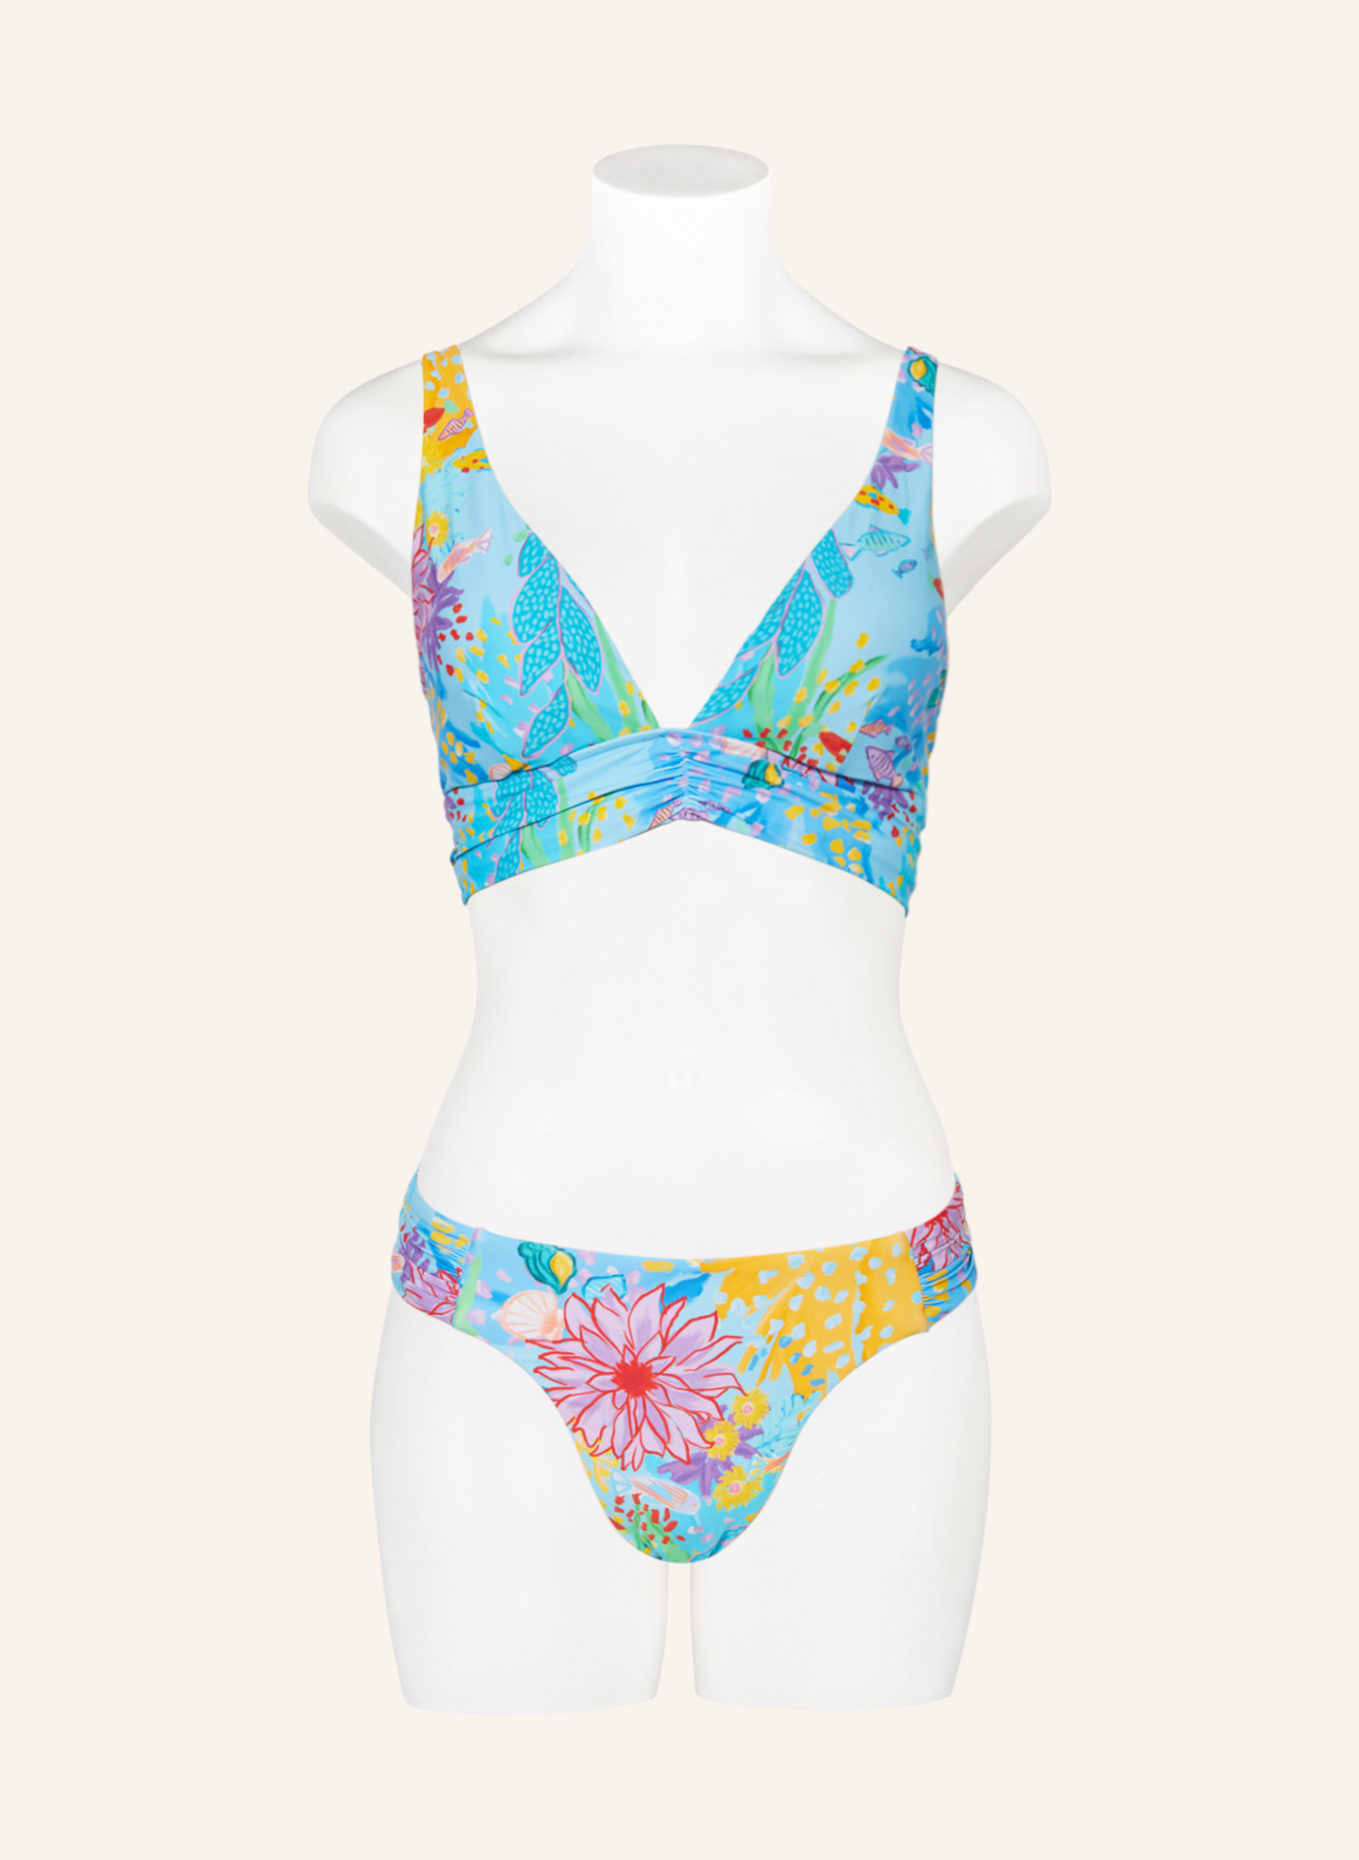 SEAFOLLY Bralette bikini top UNDER THE SEA, Color: LIGHT BLUE/ TURQUOISE/ YELLOW (Image 2)